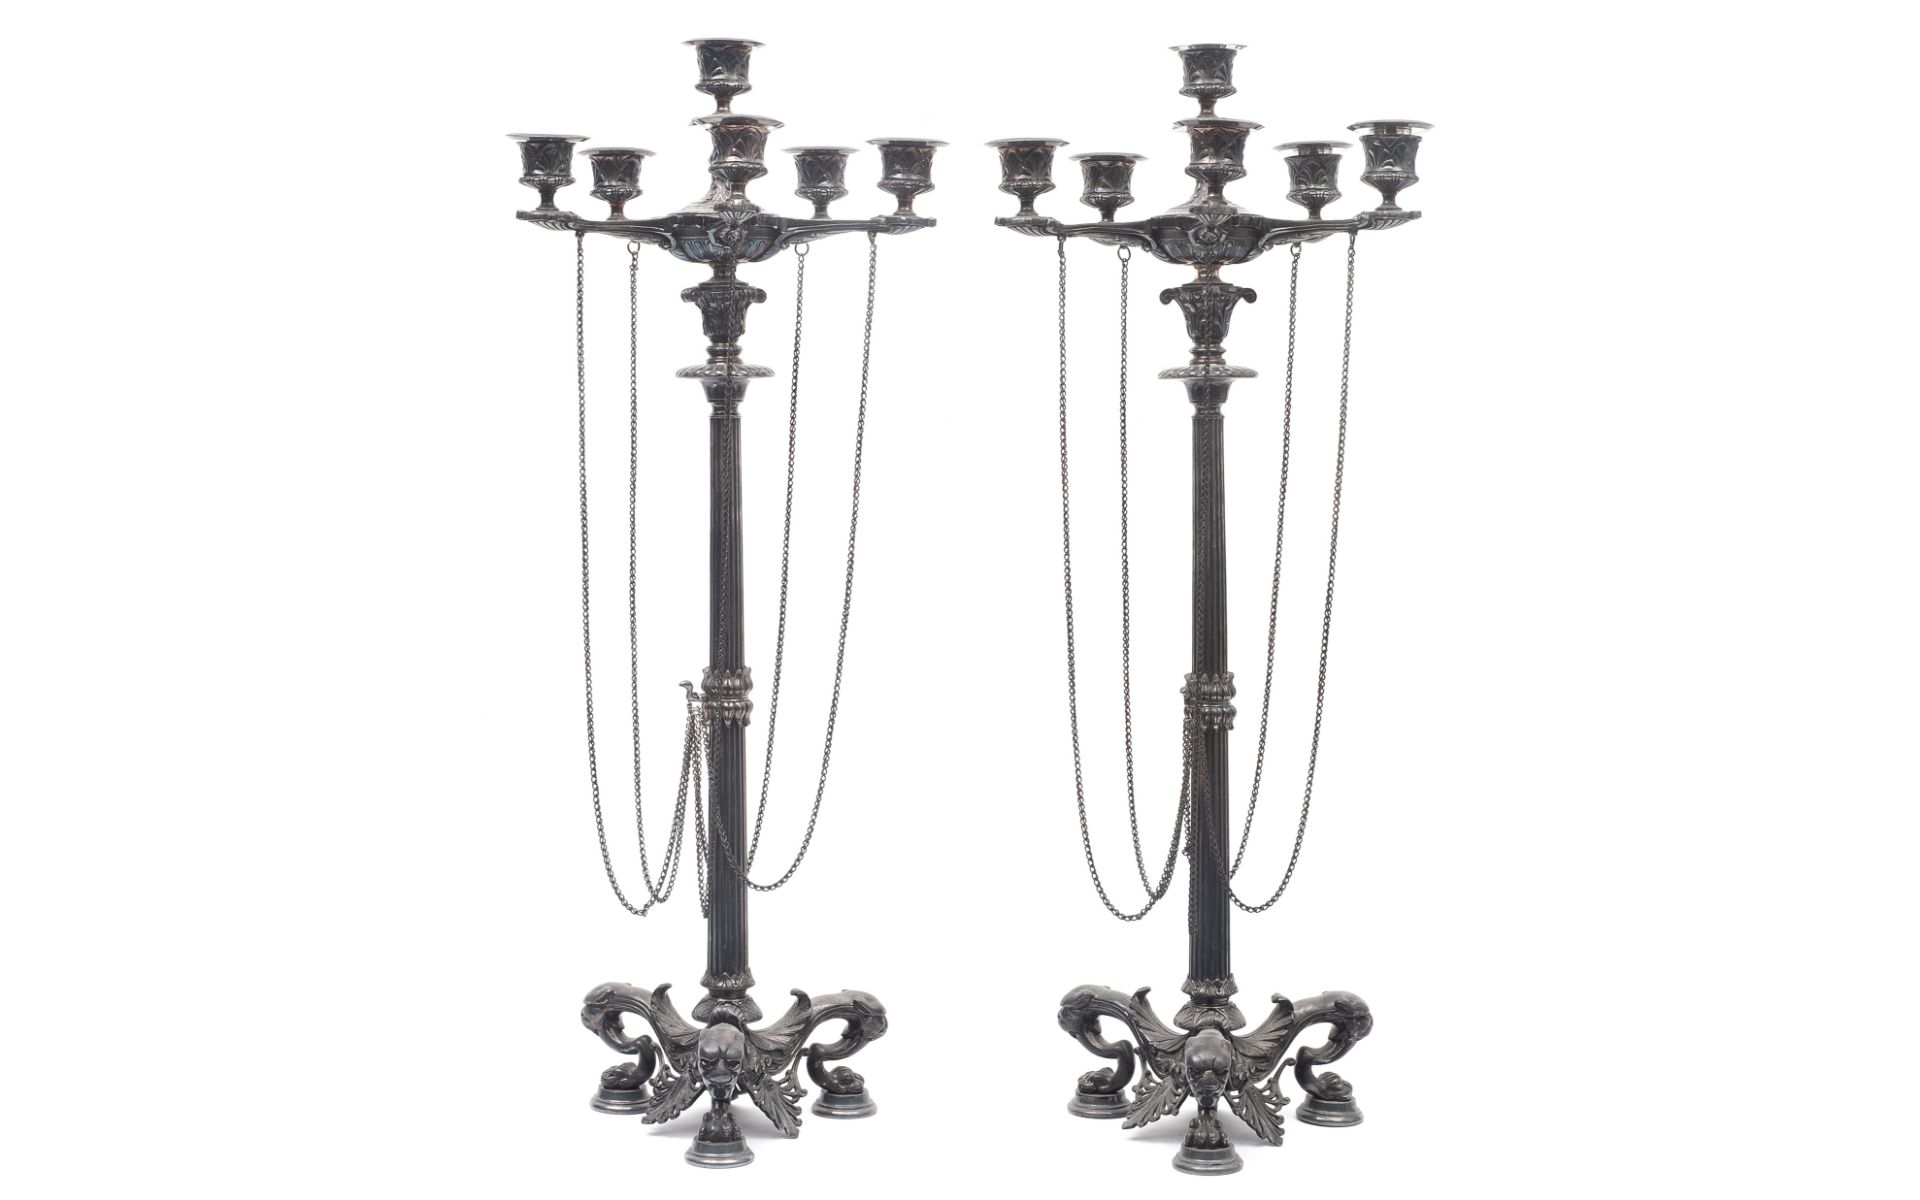 A PAIR OF 19TH CENTURY SILVERED BRONZE CANDELABRA IN THE MANNER OF BARBEDIENNE